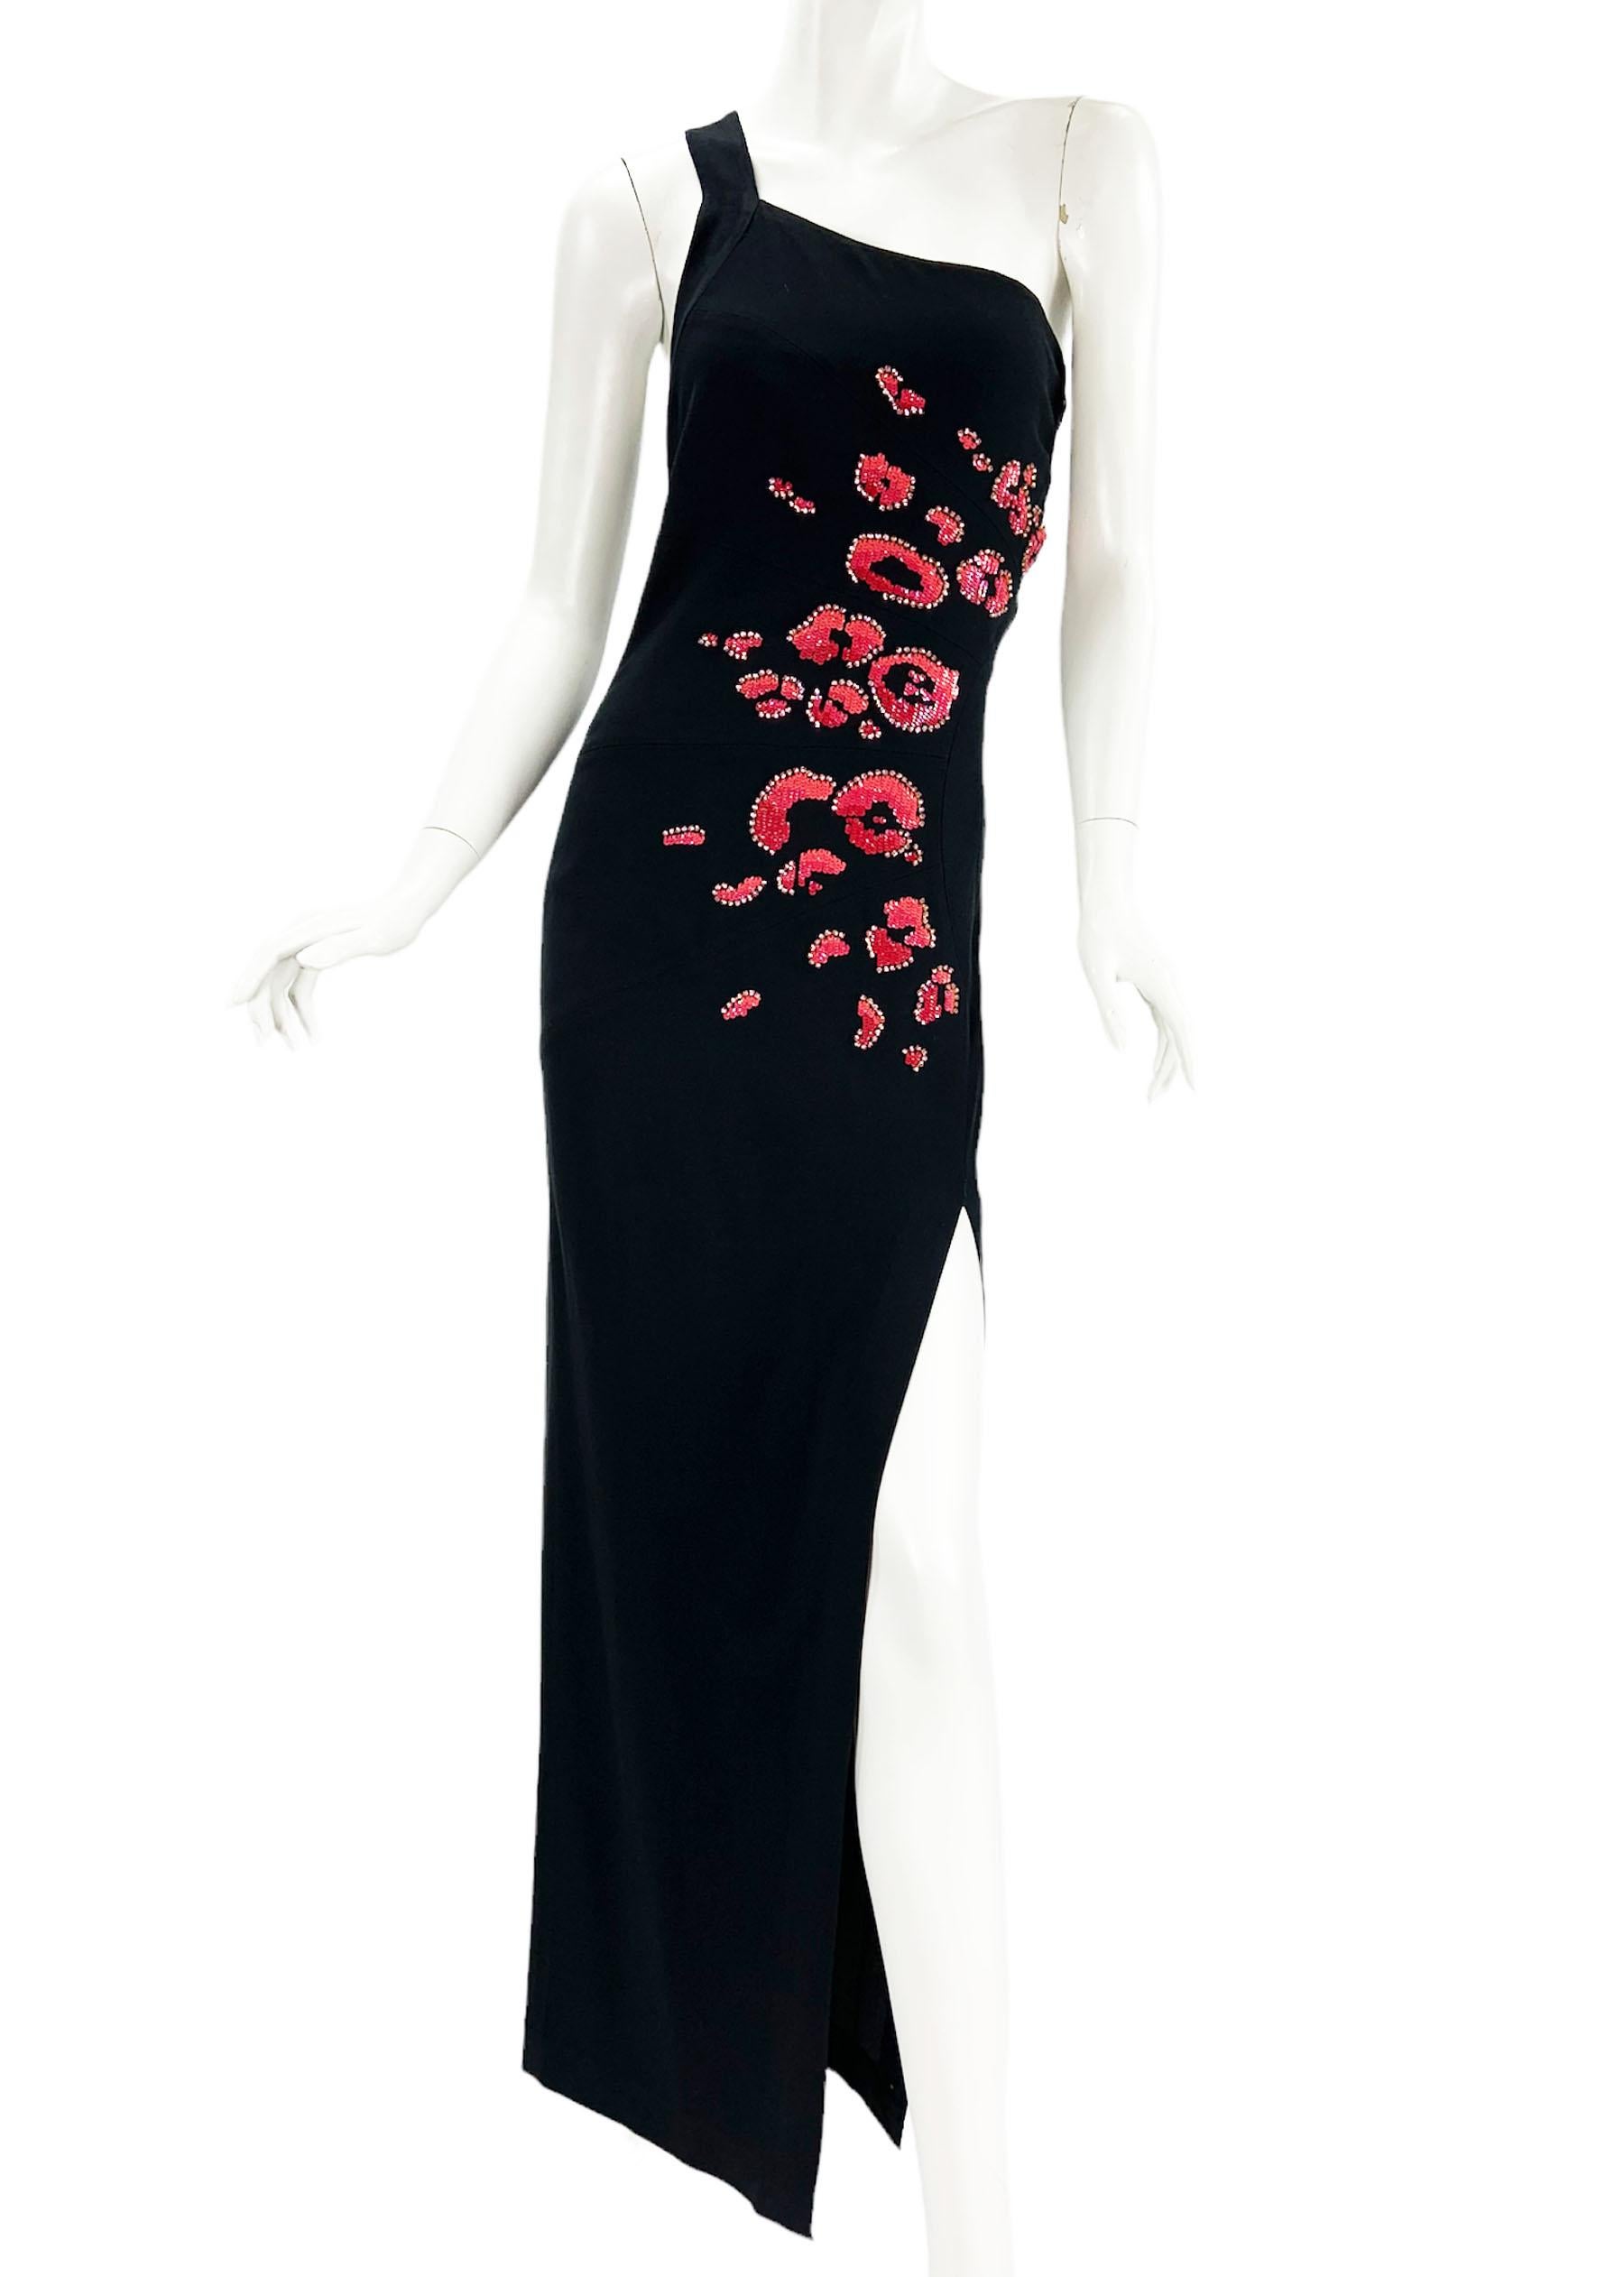 Versace Collection One Shoulder Embellished Maxi Stretch Dress Gown
Designer size 42
Black, One Shoulder Style, Embellished wit Pink Crystals; Coral, Pink and Red Sequins. High Side Slit. Back Zip Closure. Fabric is Stretchy.
Measurements approx: